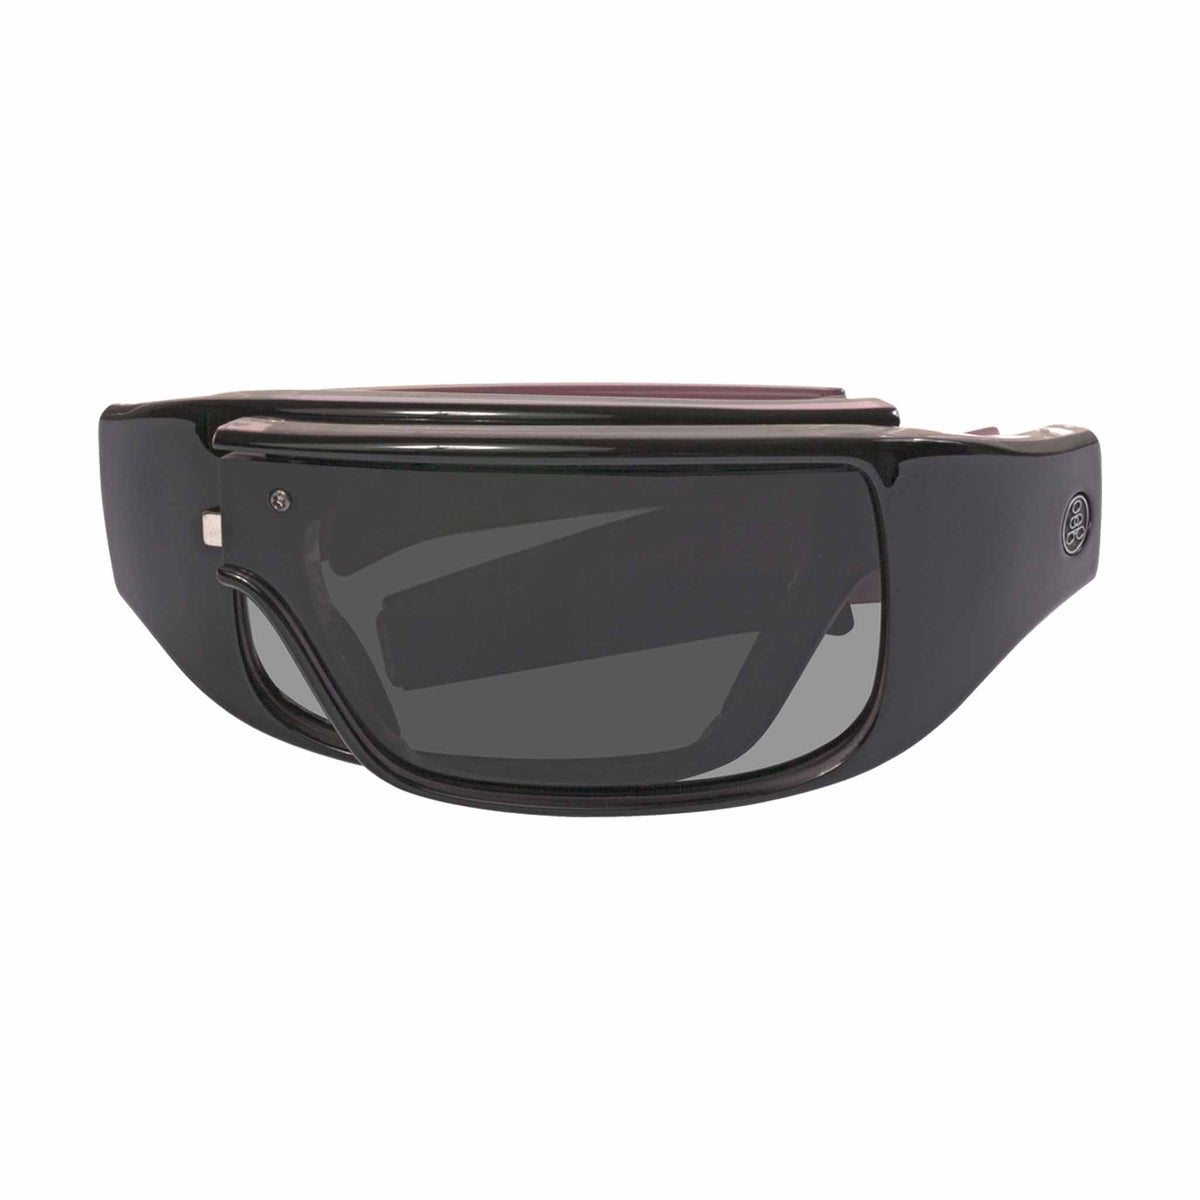 Popticals, Premium Compact Sunglasses, PopGear, 040051-KLGP, Polarized Sunglasses, Gloss Black over Pink Crystal Frame , Gray Lenses, Compact View